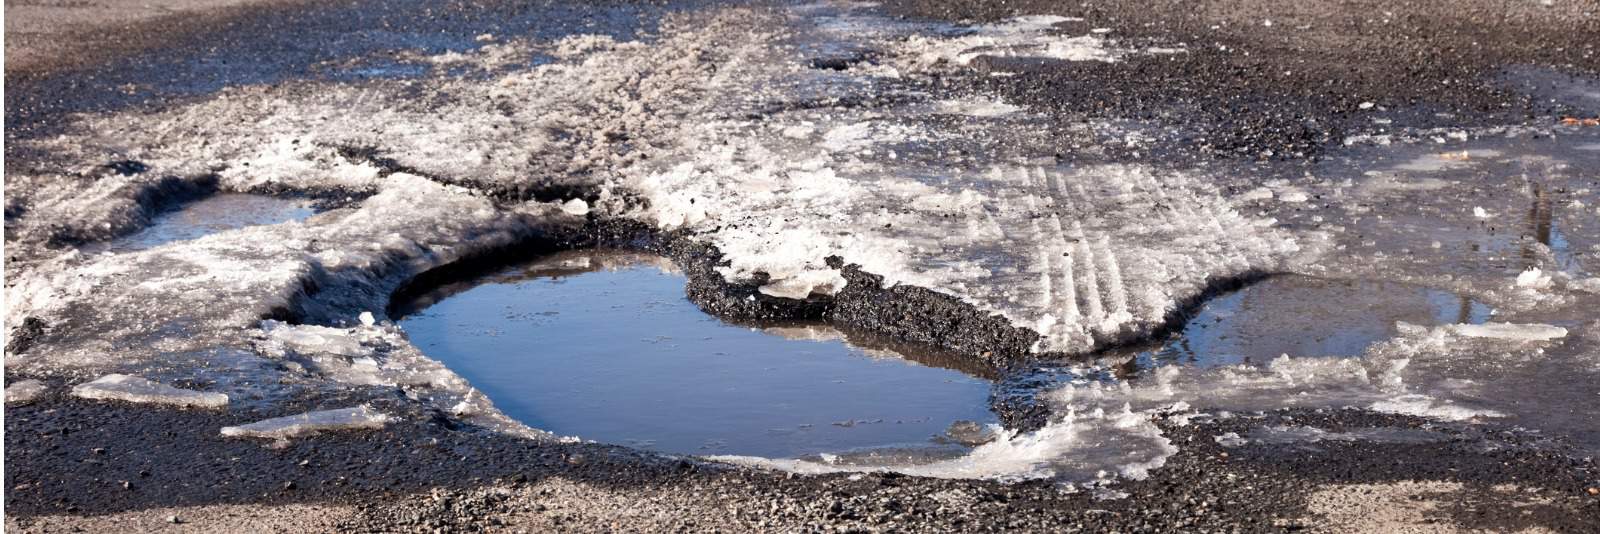 Giant pothole - will your insurance cover the damage it causes?